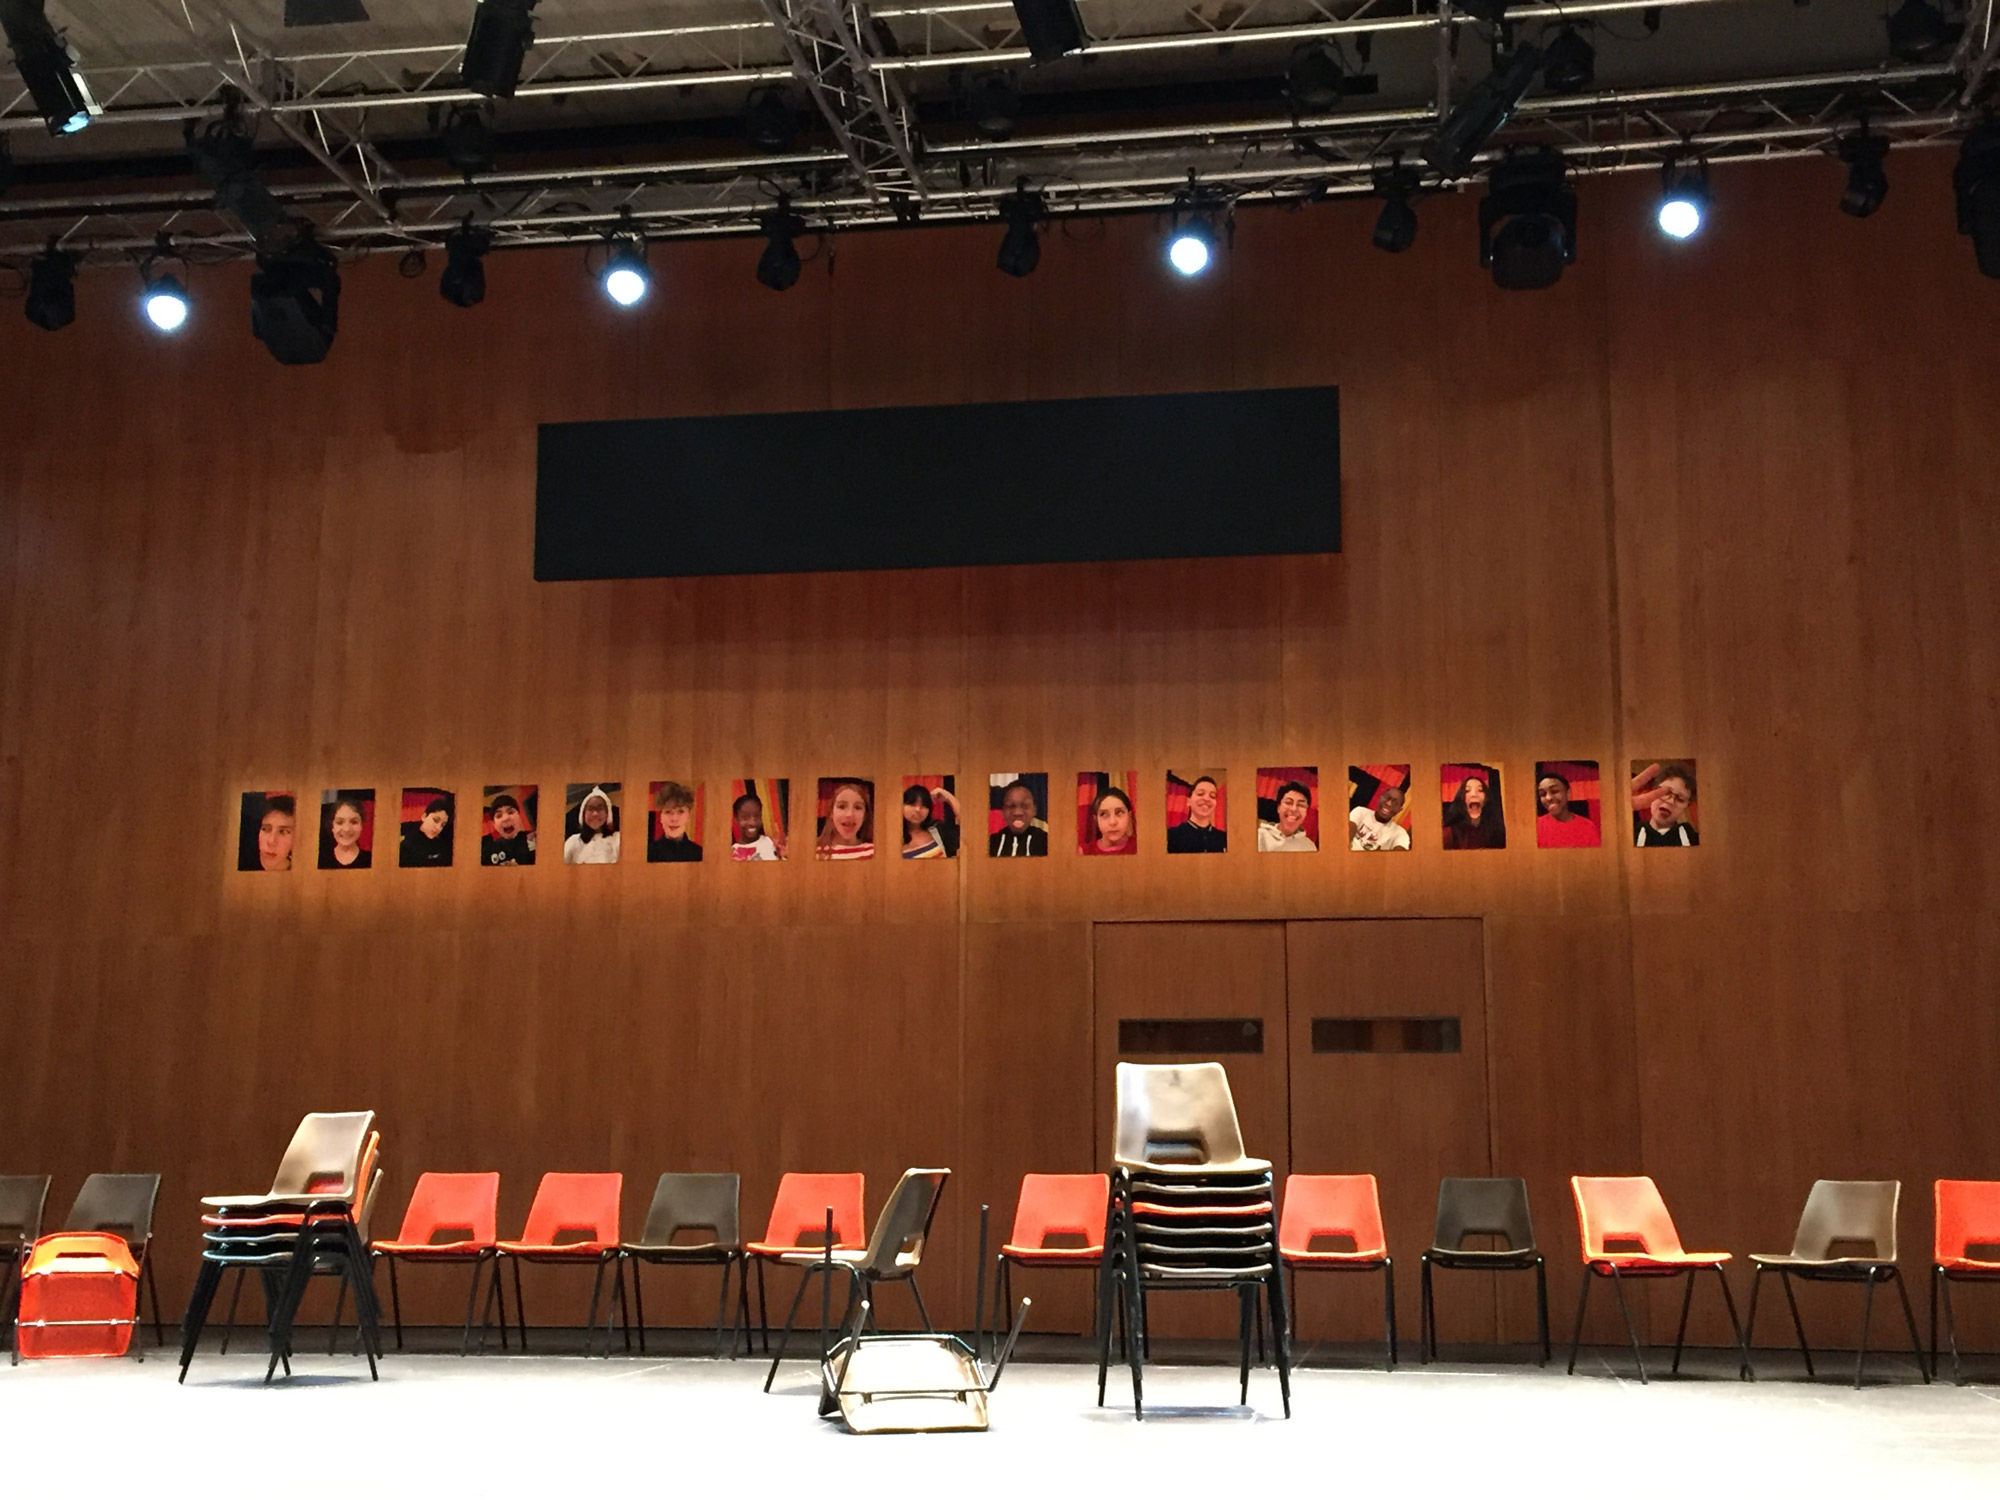 Dozens of plastic chairs are stacked and scattered on an otherwise empty stage. Behind them a wooden backdrop has 17 small photographs of children stuck in a row